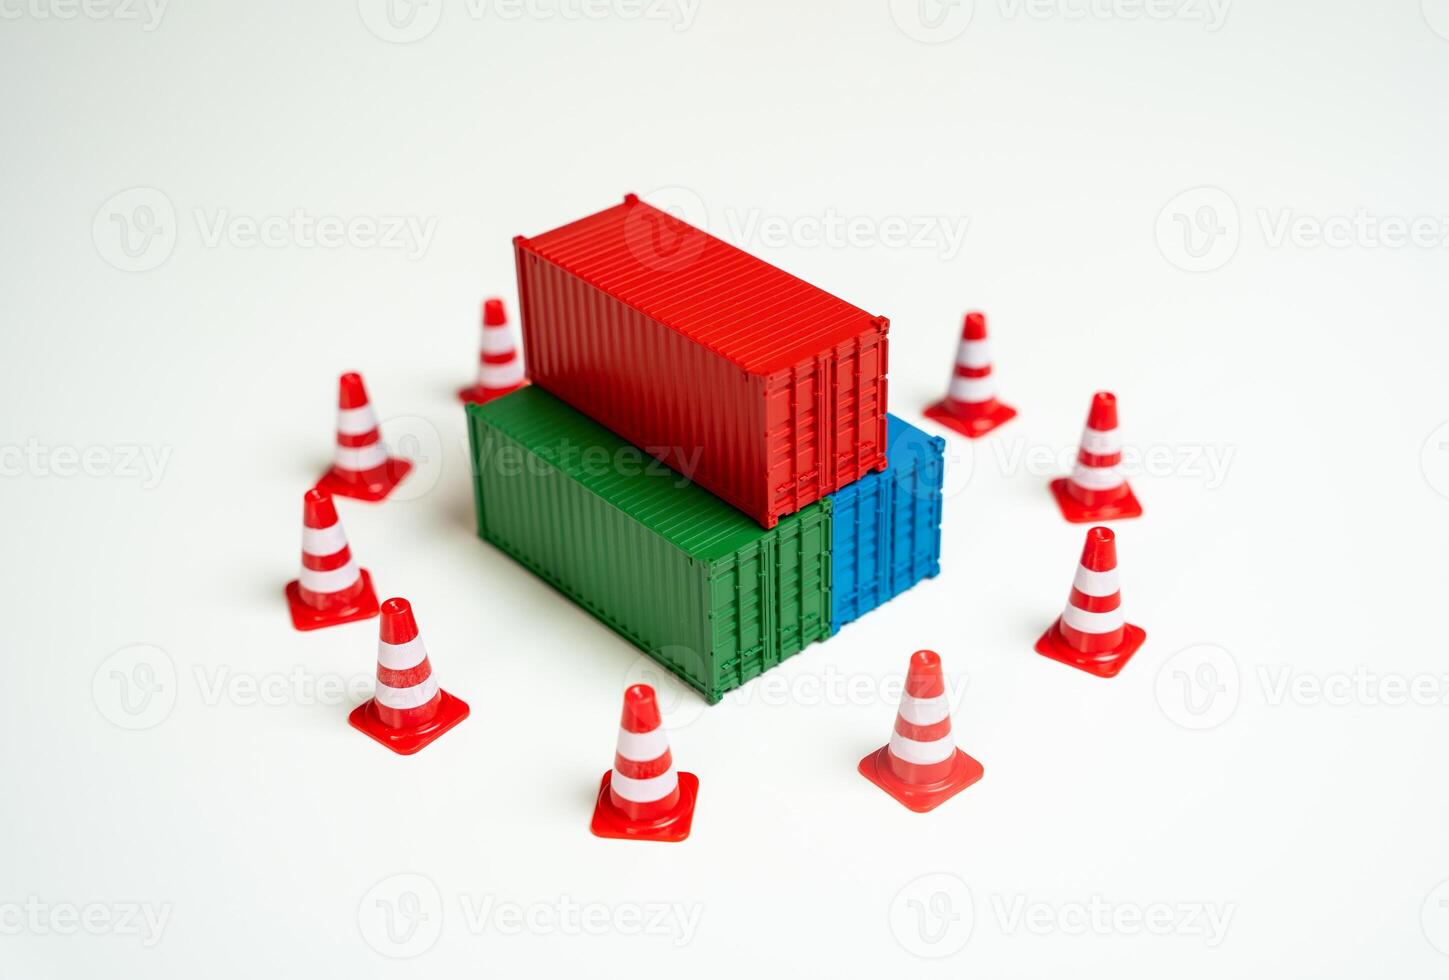 Seizure of cargo. Sea containers are surrounded by road cones and are inaccessible for transportation. Legal or logistical challenges hindering the movement of goods. Shipping complexities disruptions photo